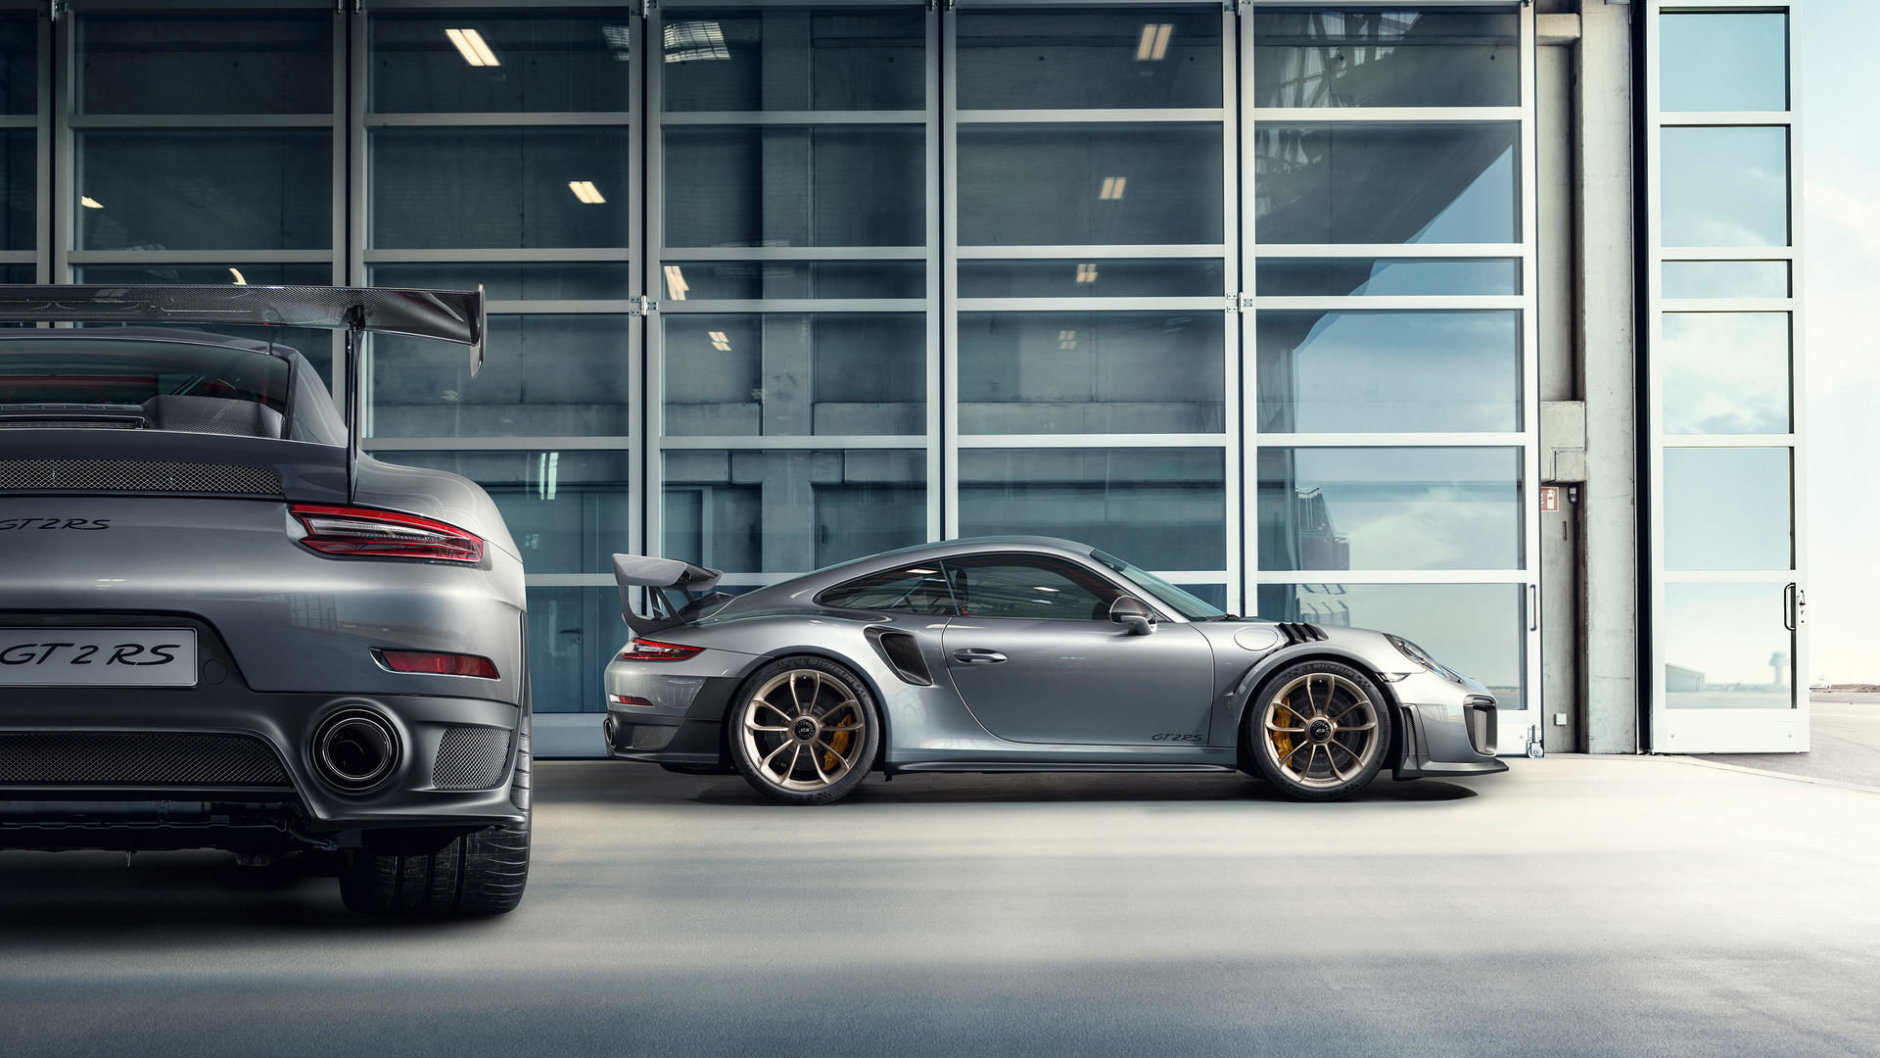 The Porsche 911 RS is one of the contenders on Motor Trend's Best Driver's Car list. (Courtesy Porsche)